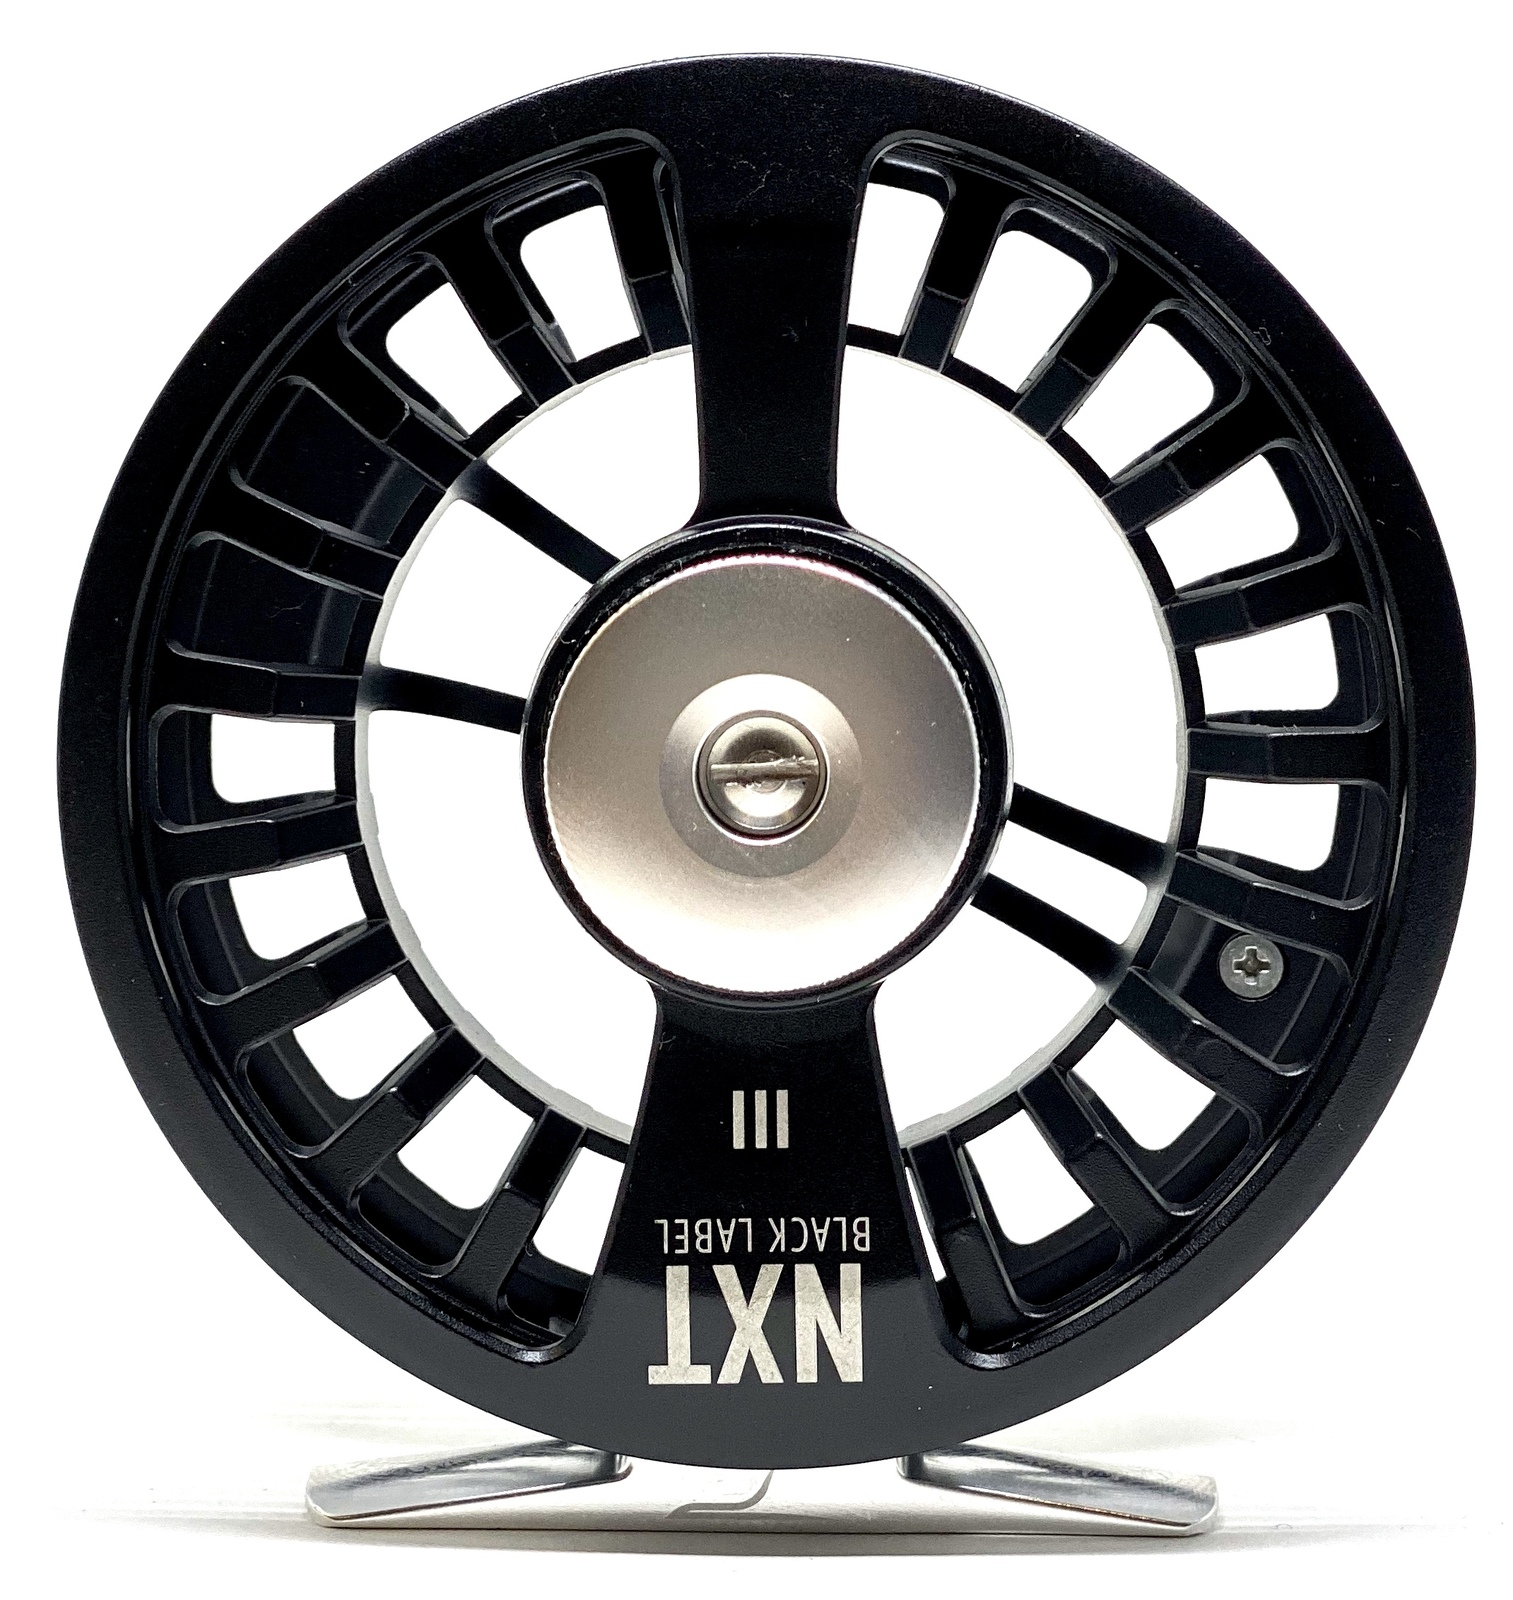 TFO NXT Black Label Fly Fishing Reels - Free AU Express @ Otto's TW